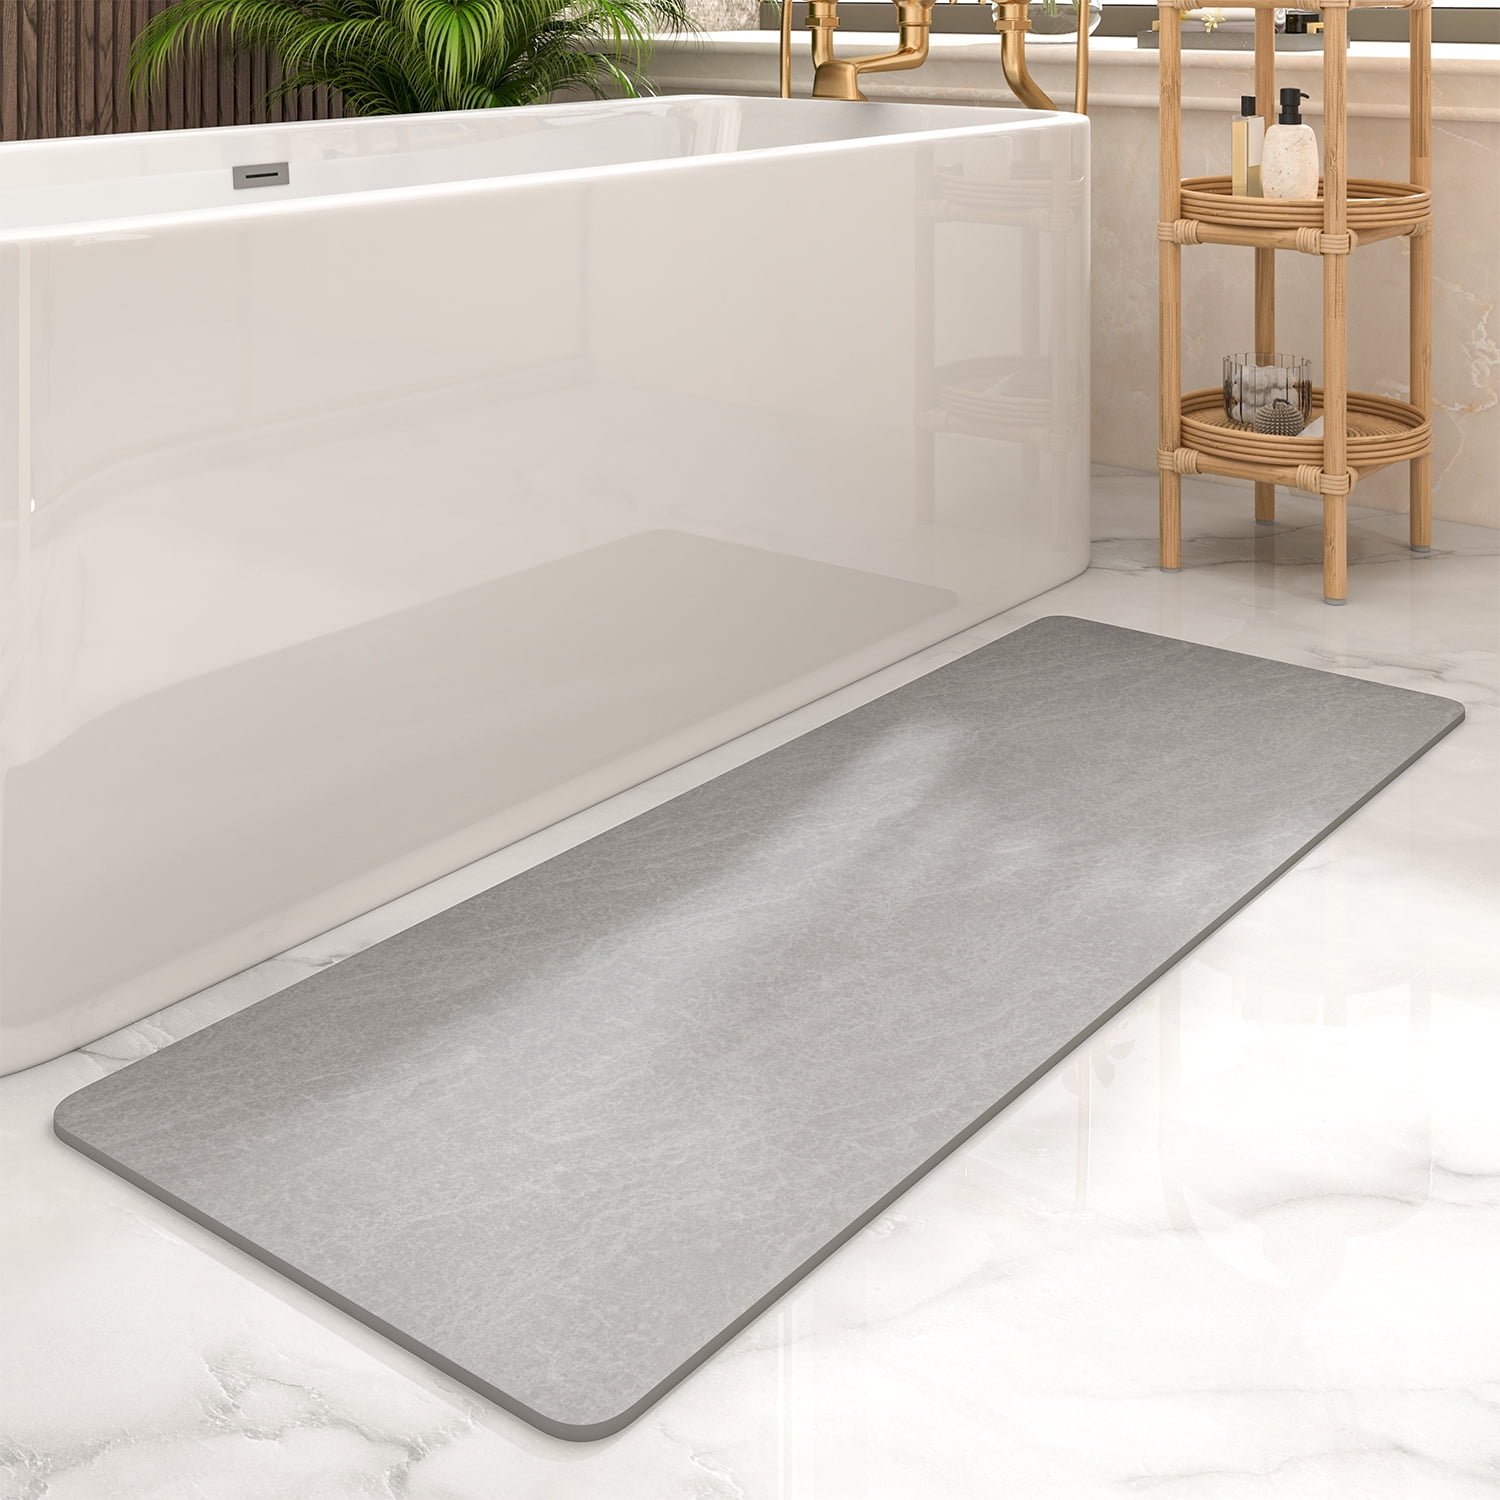 COCOER Non Slip Bath-Mat, Super Absorbent Washable Thin Bathroom Mats for  Bathroom with Rubber Backing, Fit Under Door Rugs 17x28 Gray